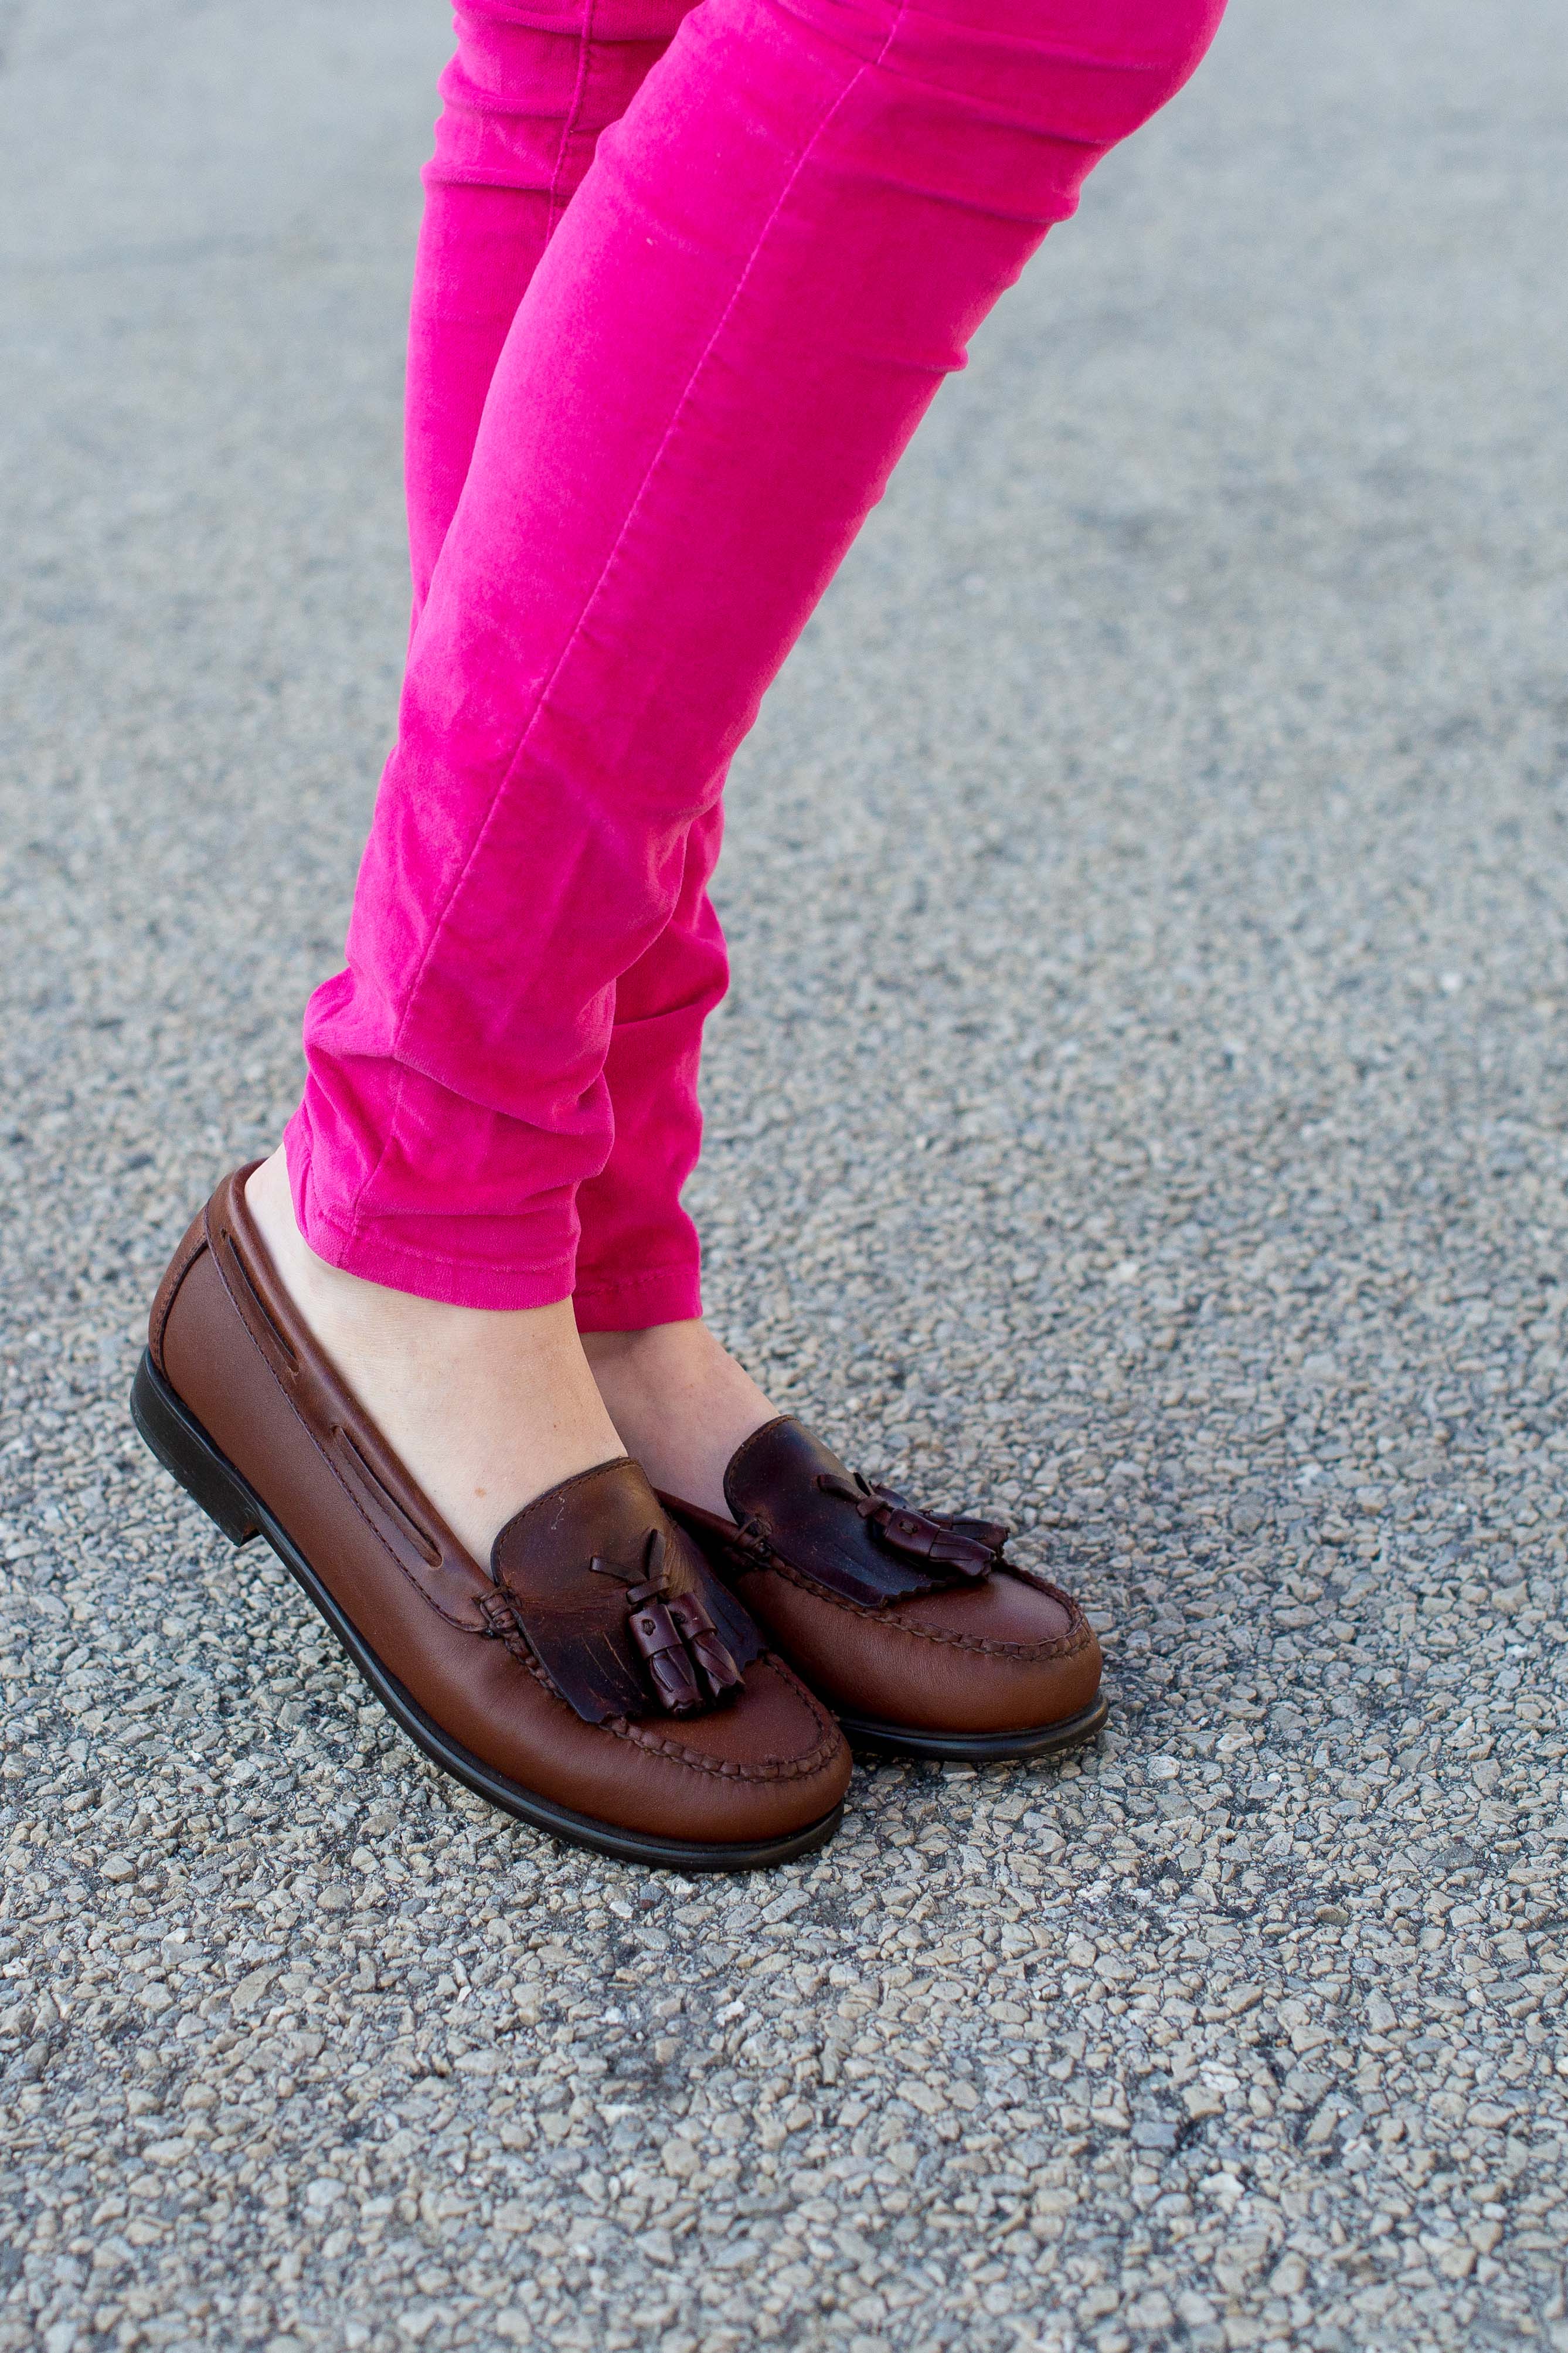 Tassel Loafers - Kelly in the City